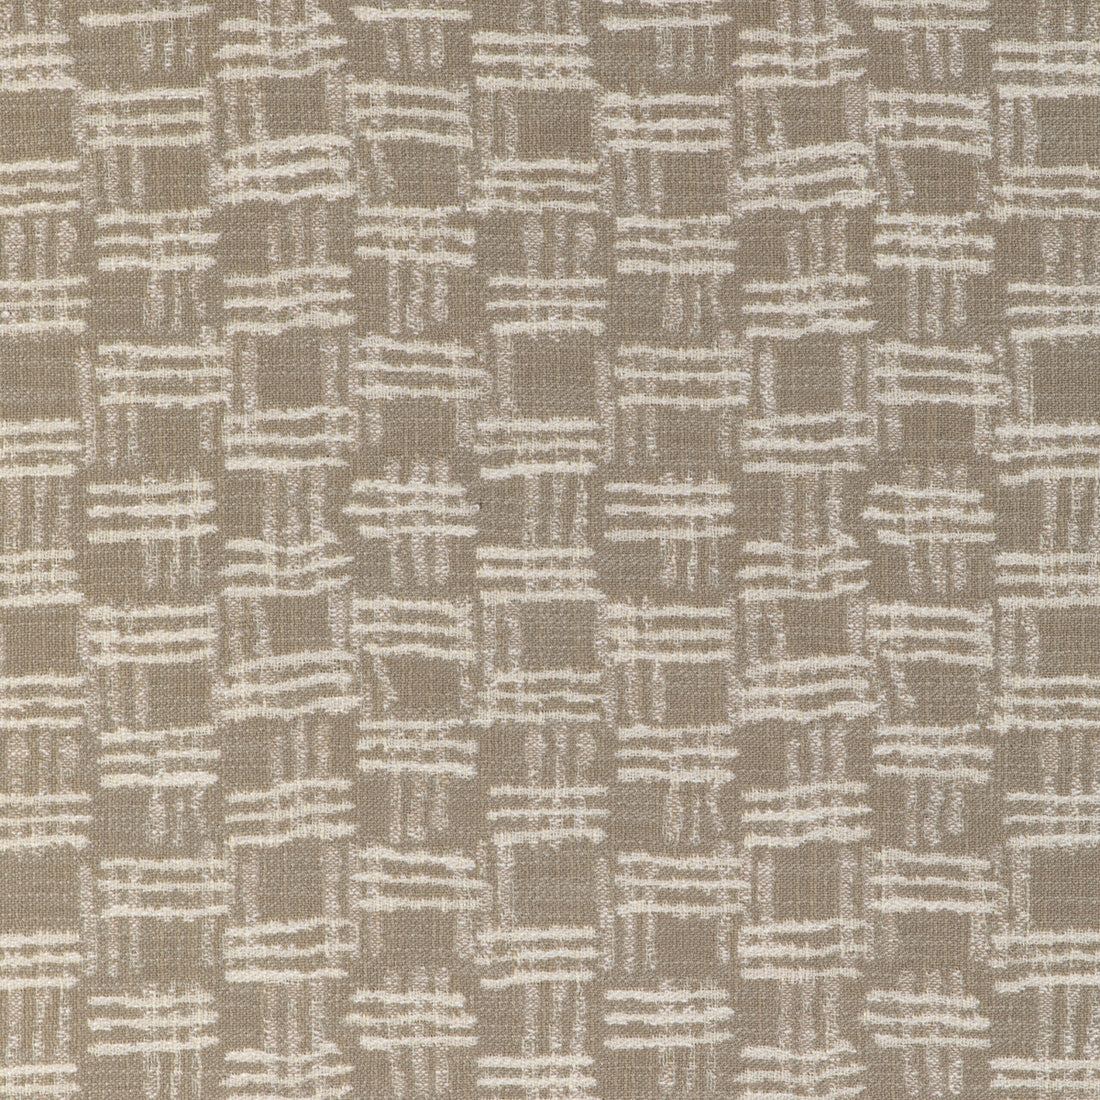 Cross Waves fabric in sand color - pattern 36928.16.0 - by Kravet Couture in the Riviera collection